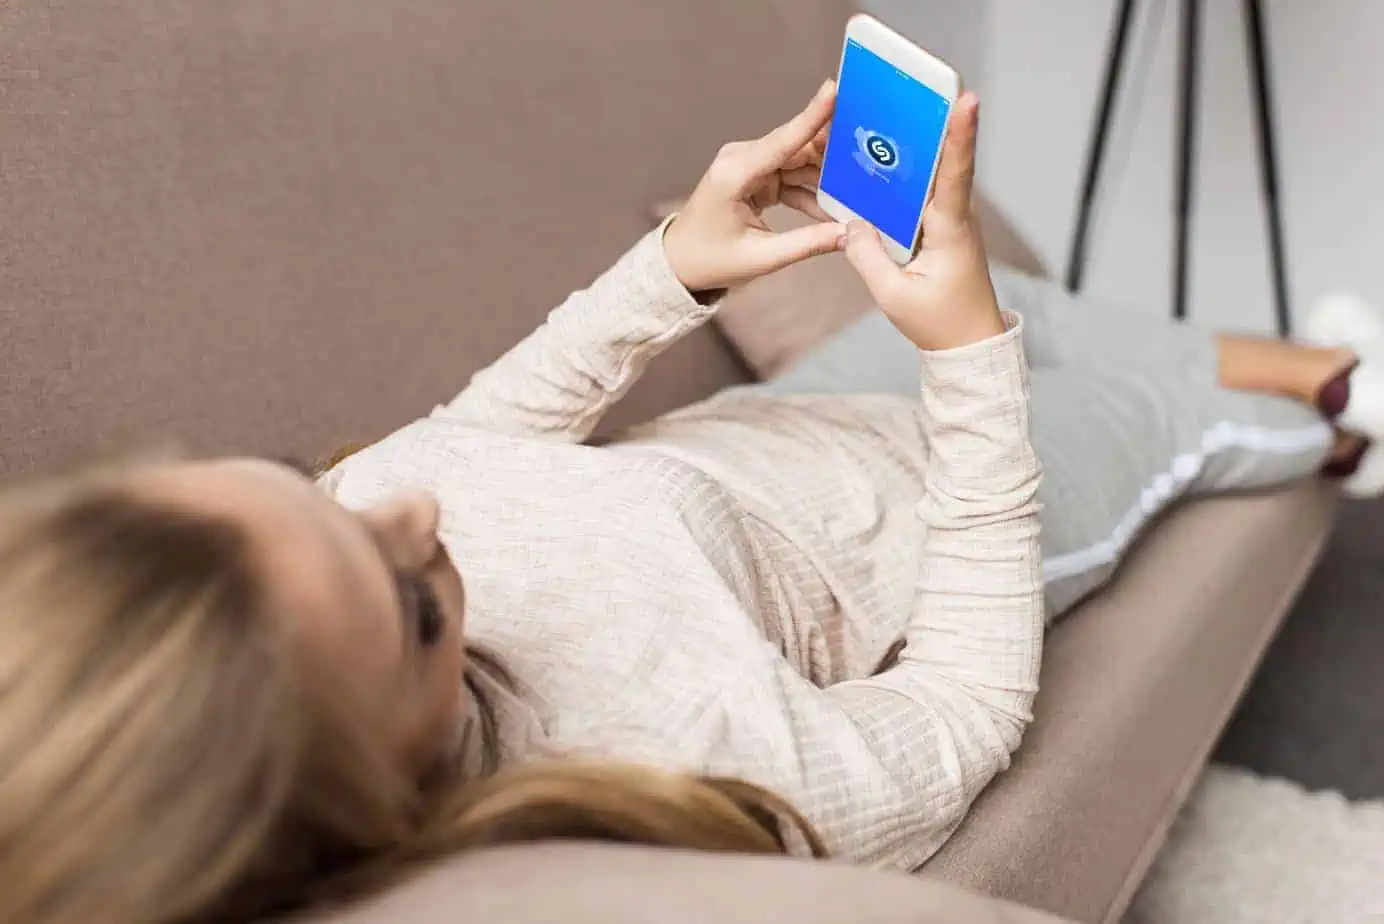 A woman laying on a couch holding a smart phone